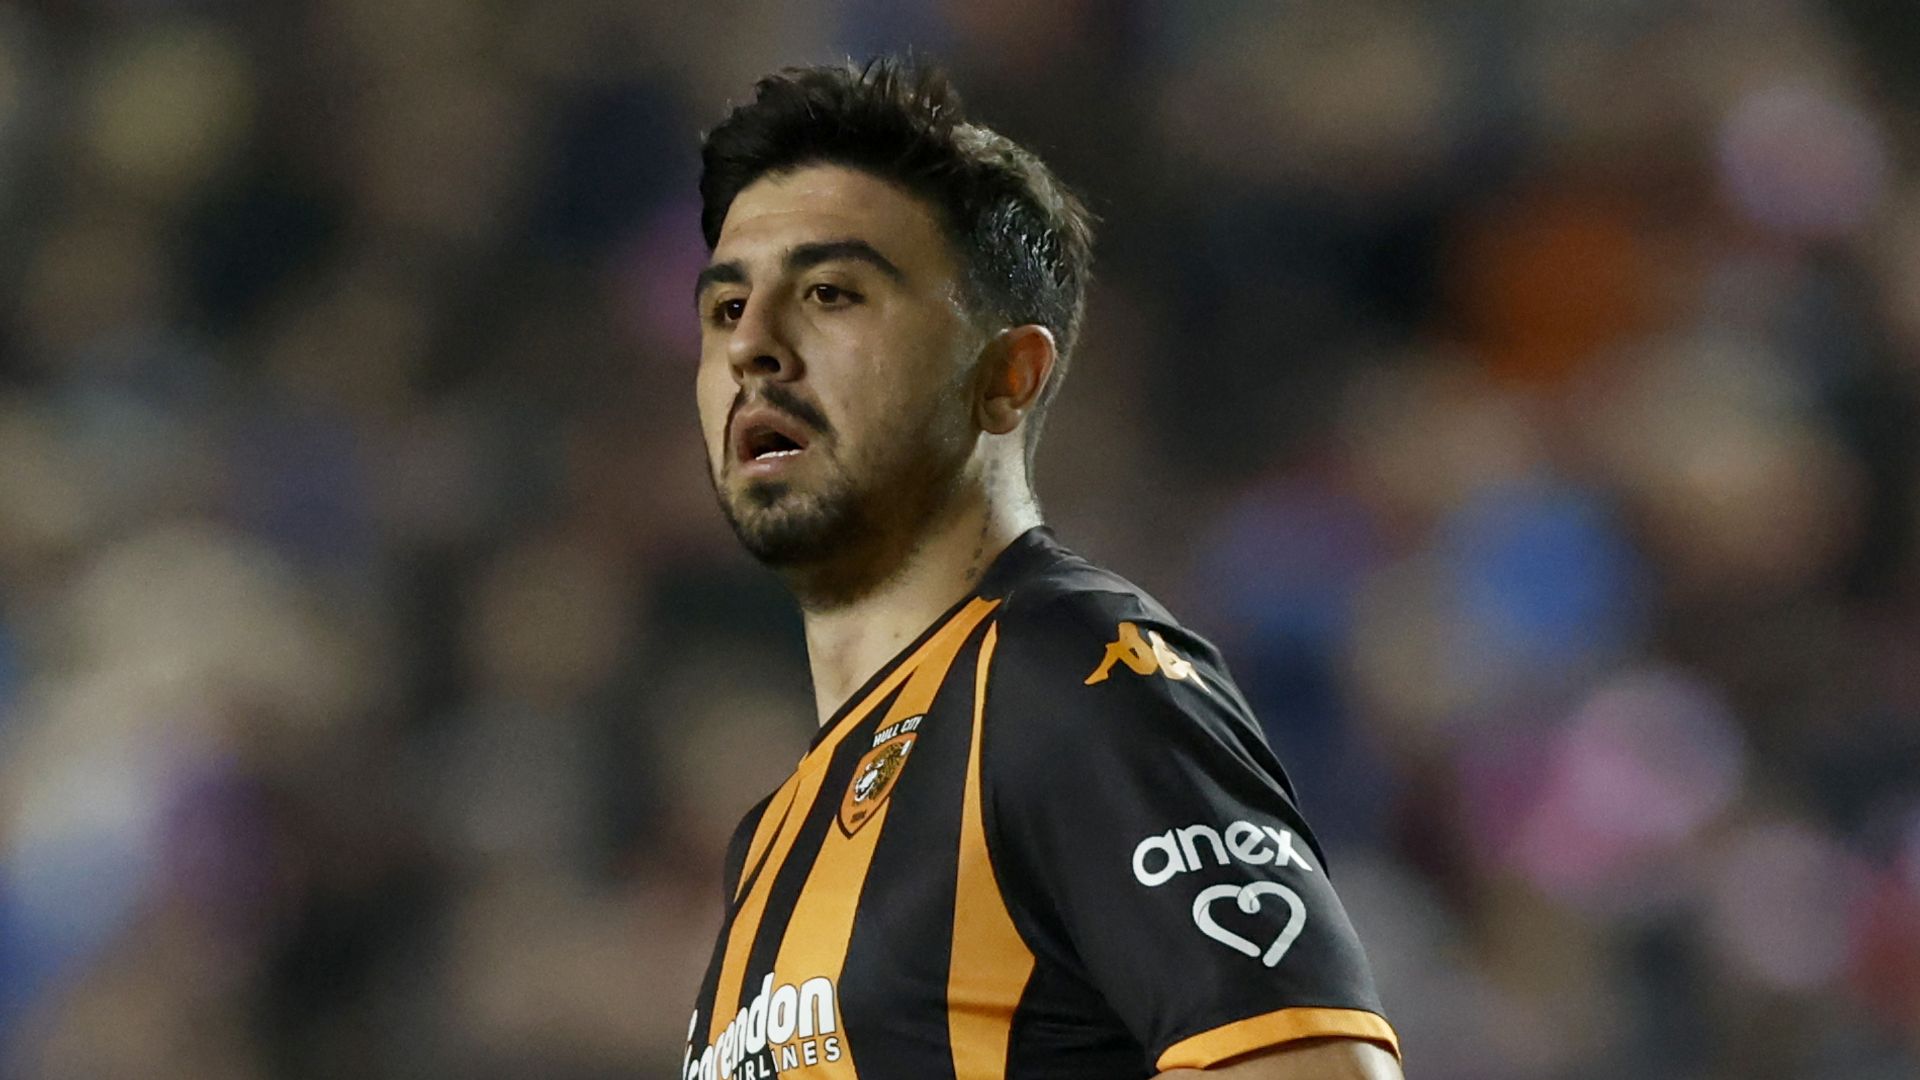 Hull ease past QPR to keep slim play-off aims alive